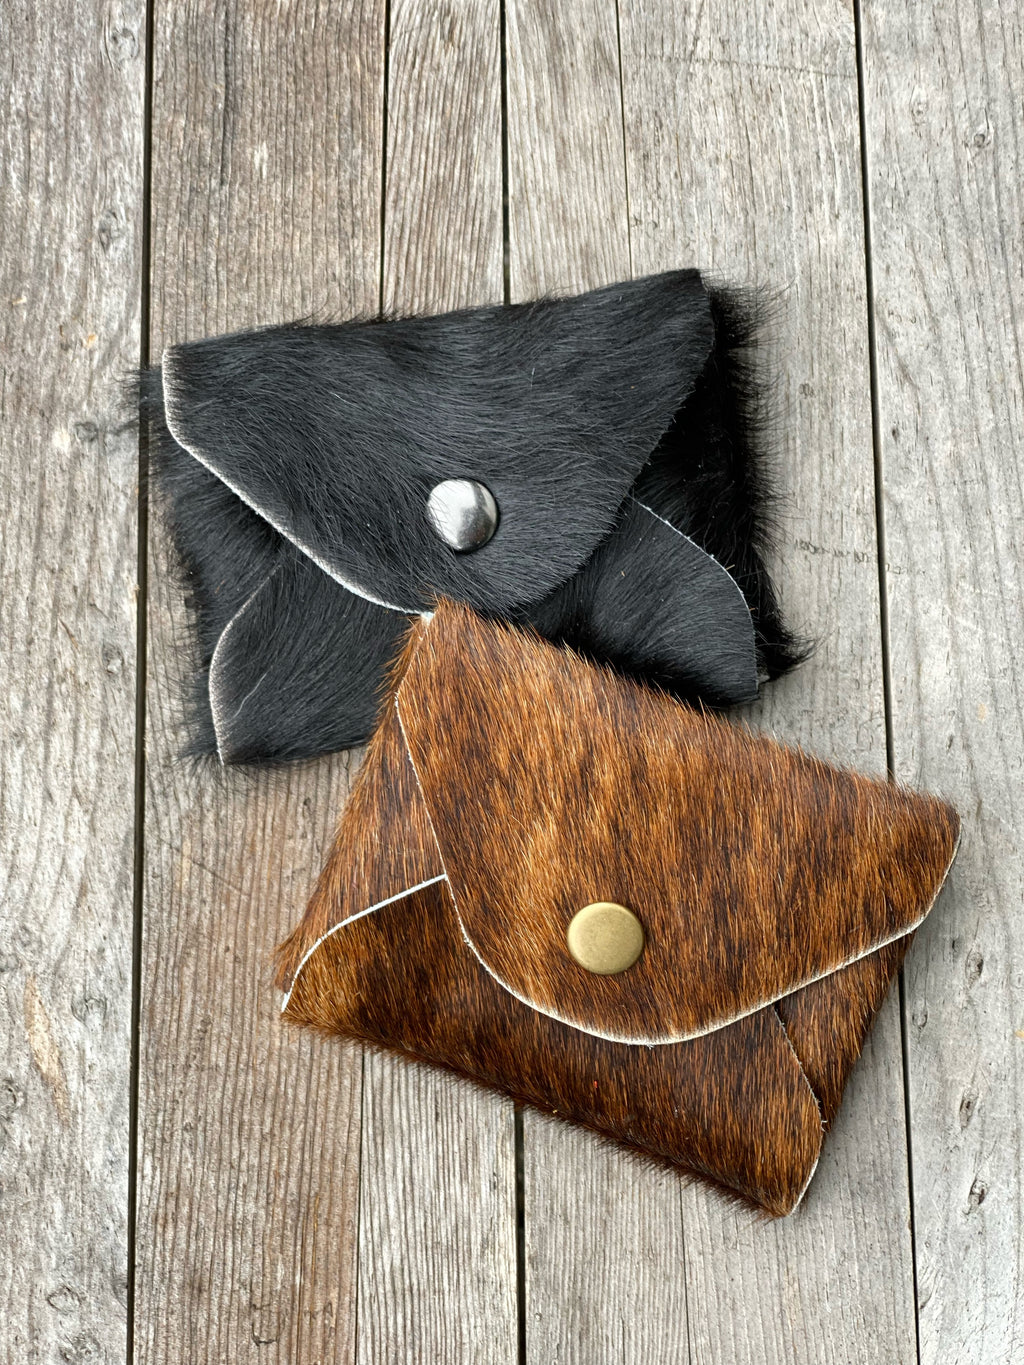 Cow Hide Mini Leather Card Cash Wallet, Gift Card Holder, Credit Card Snap Pouch, Hair On Leather Hide Small Snap Coin Purse